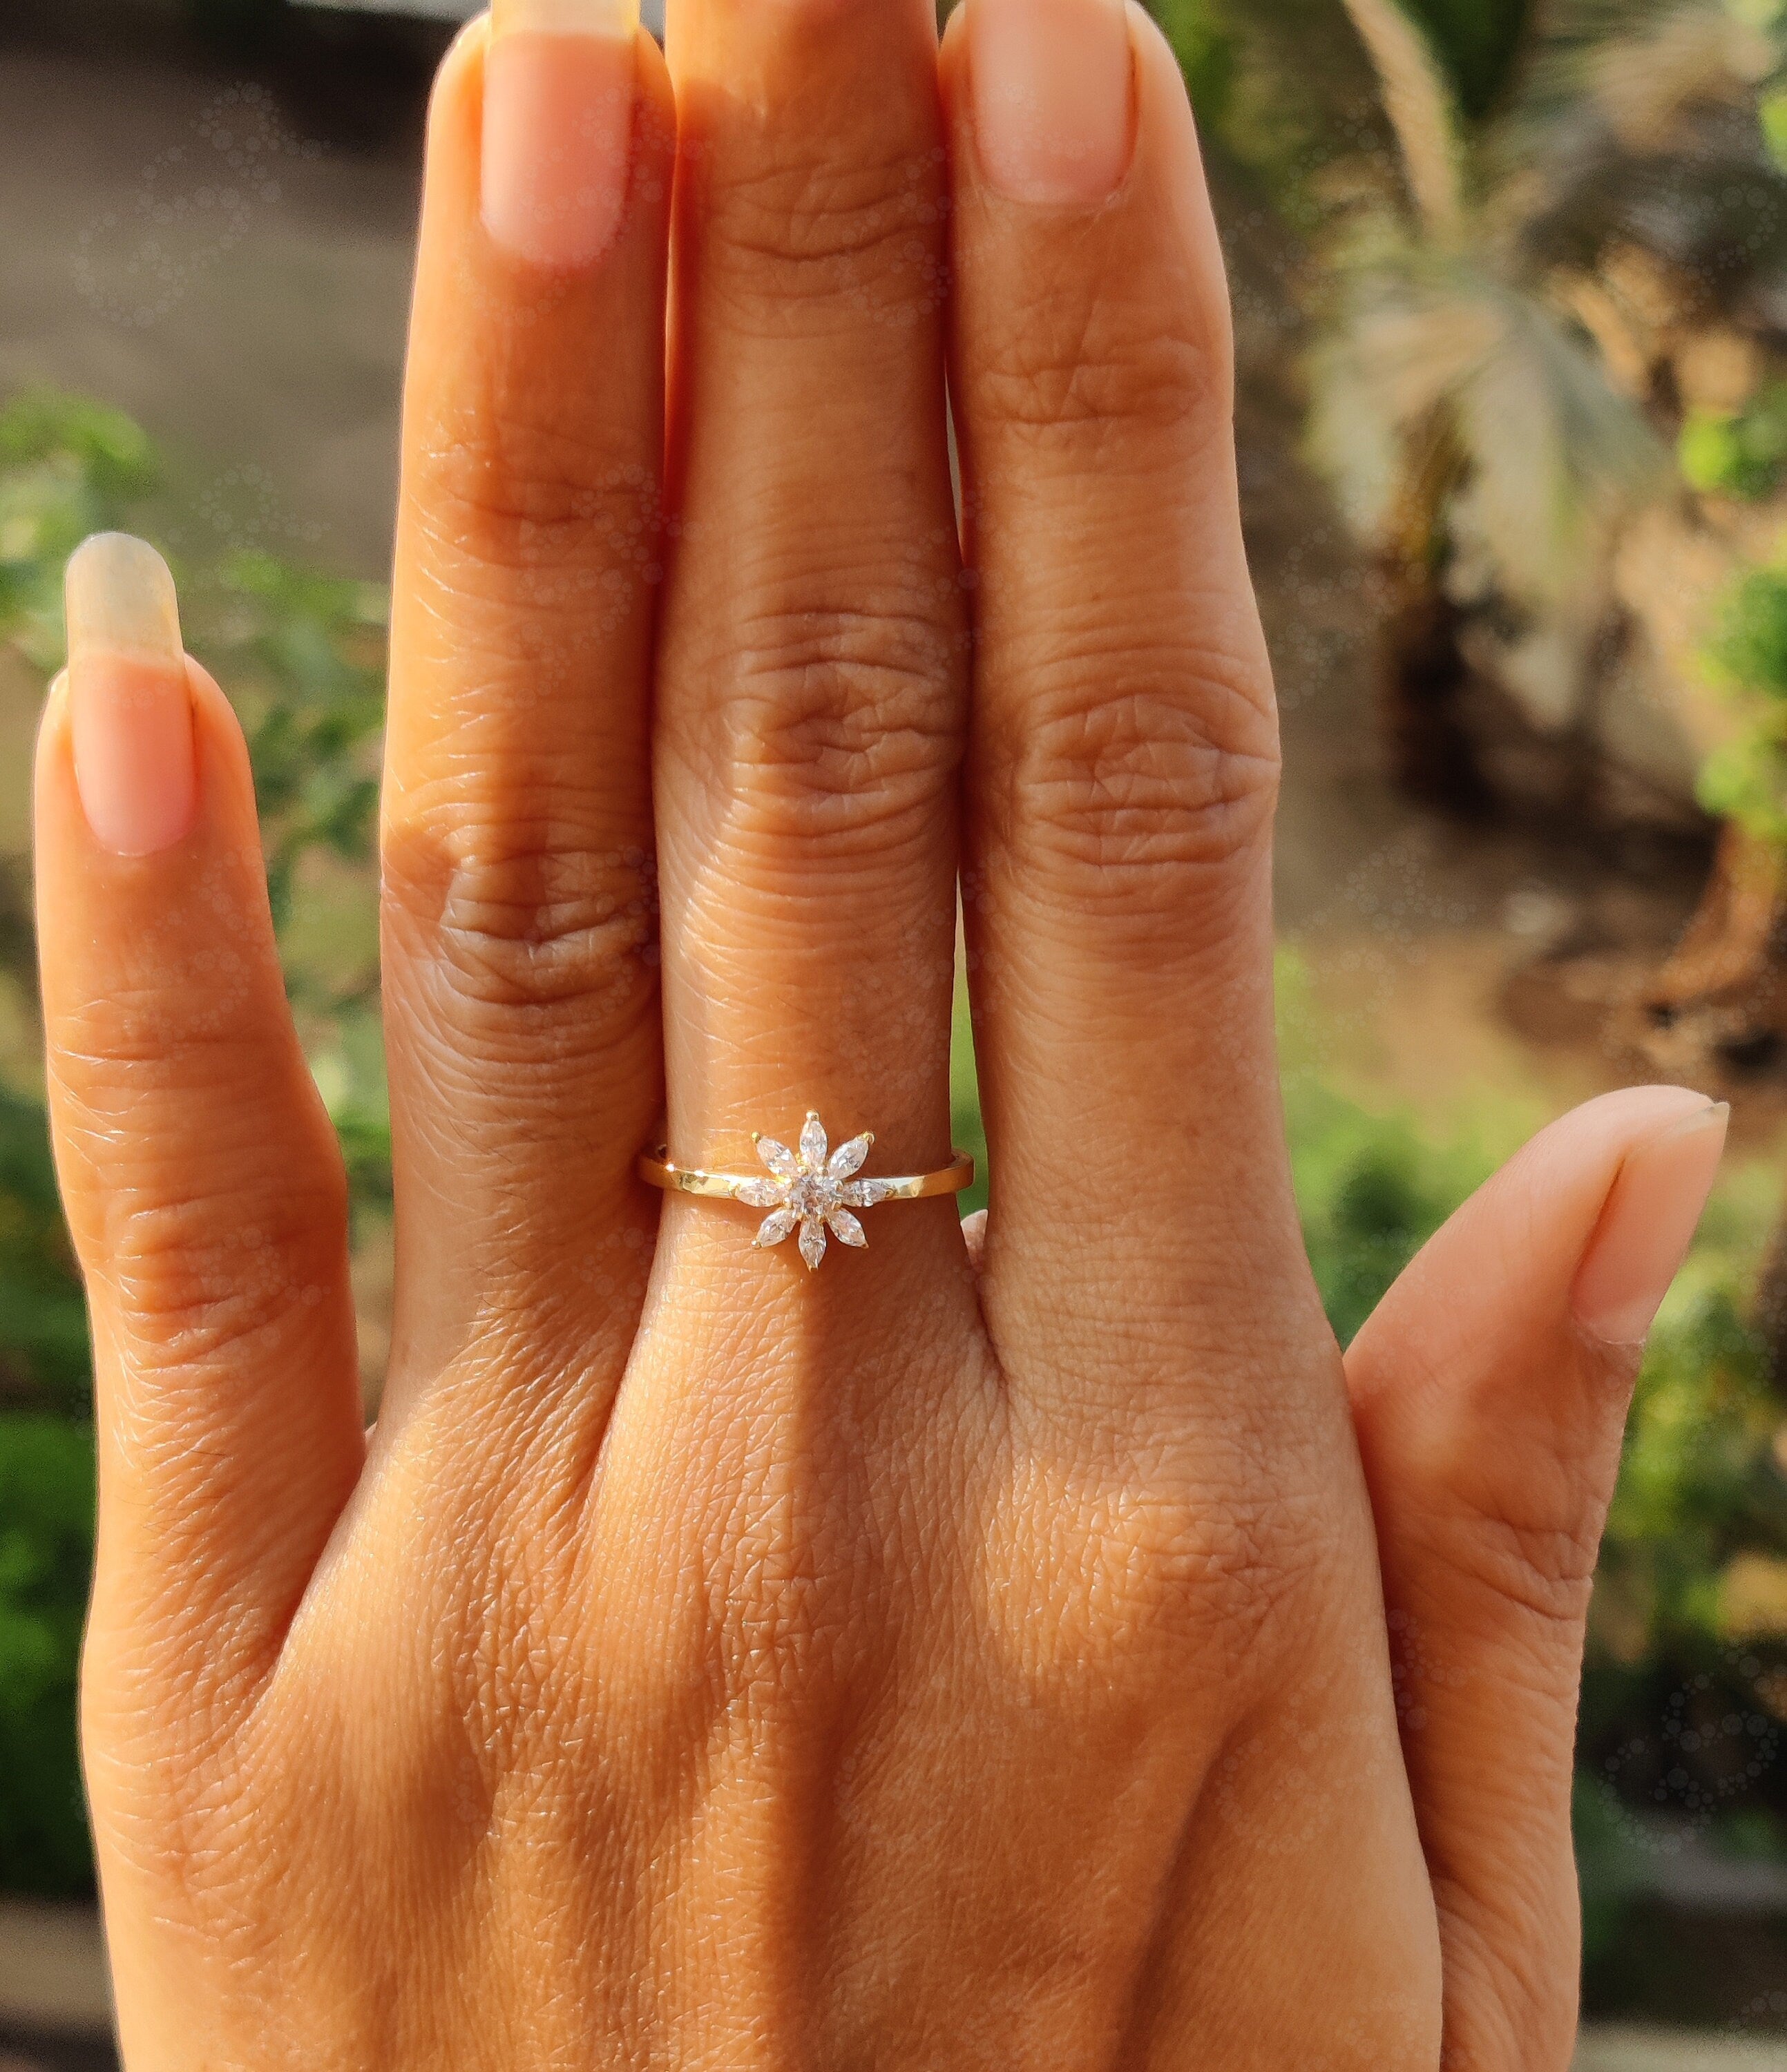 Radiant Sunburst: Silver and Gold Starburst Floral Moissanite Stackable Ring - Nature-Inspired Women's Wedding Ring, Simple Dainty Ring